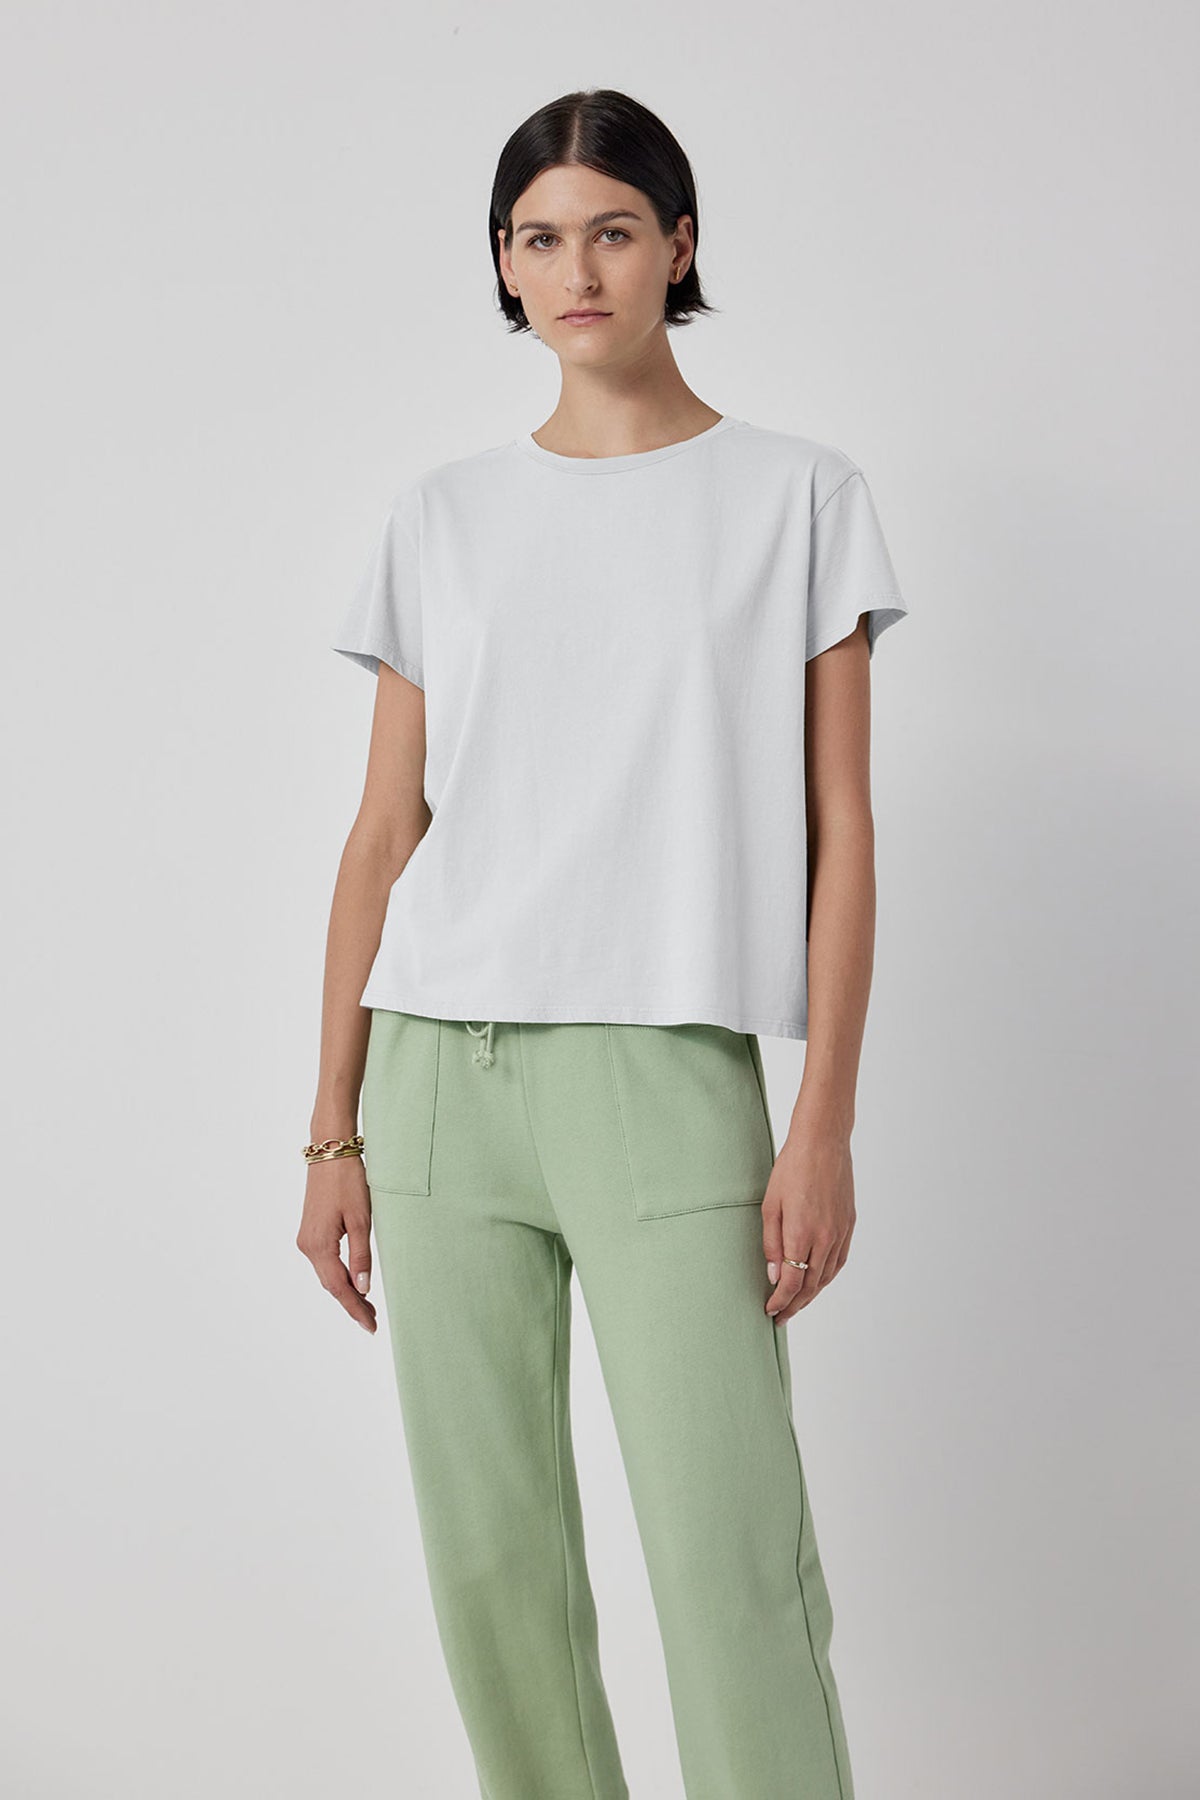 The model is wearing a TOPANGA TEE white t-shirt and Velvet by Jenny Graham organic cotton green trousers.-36212410548417